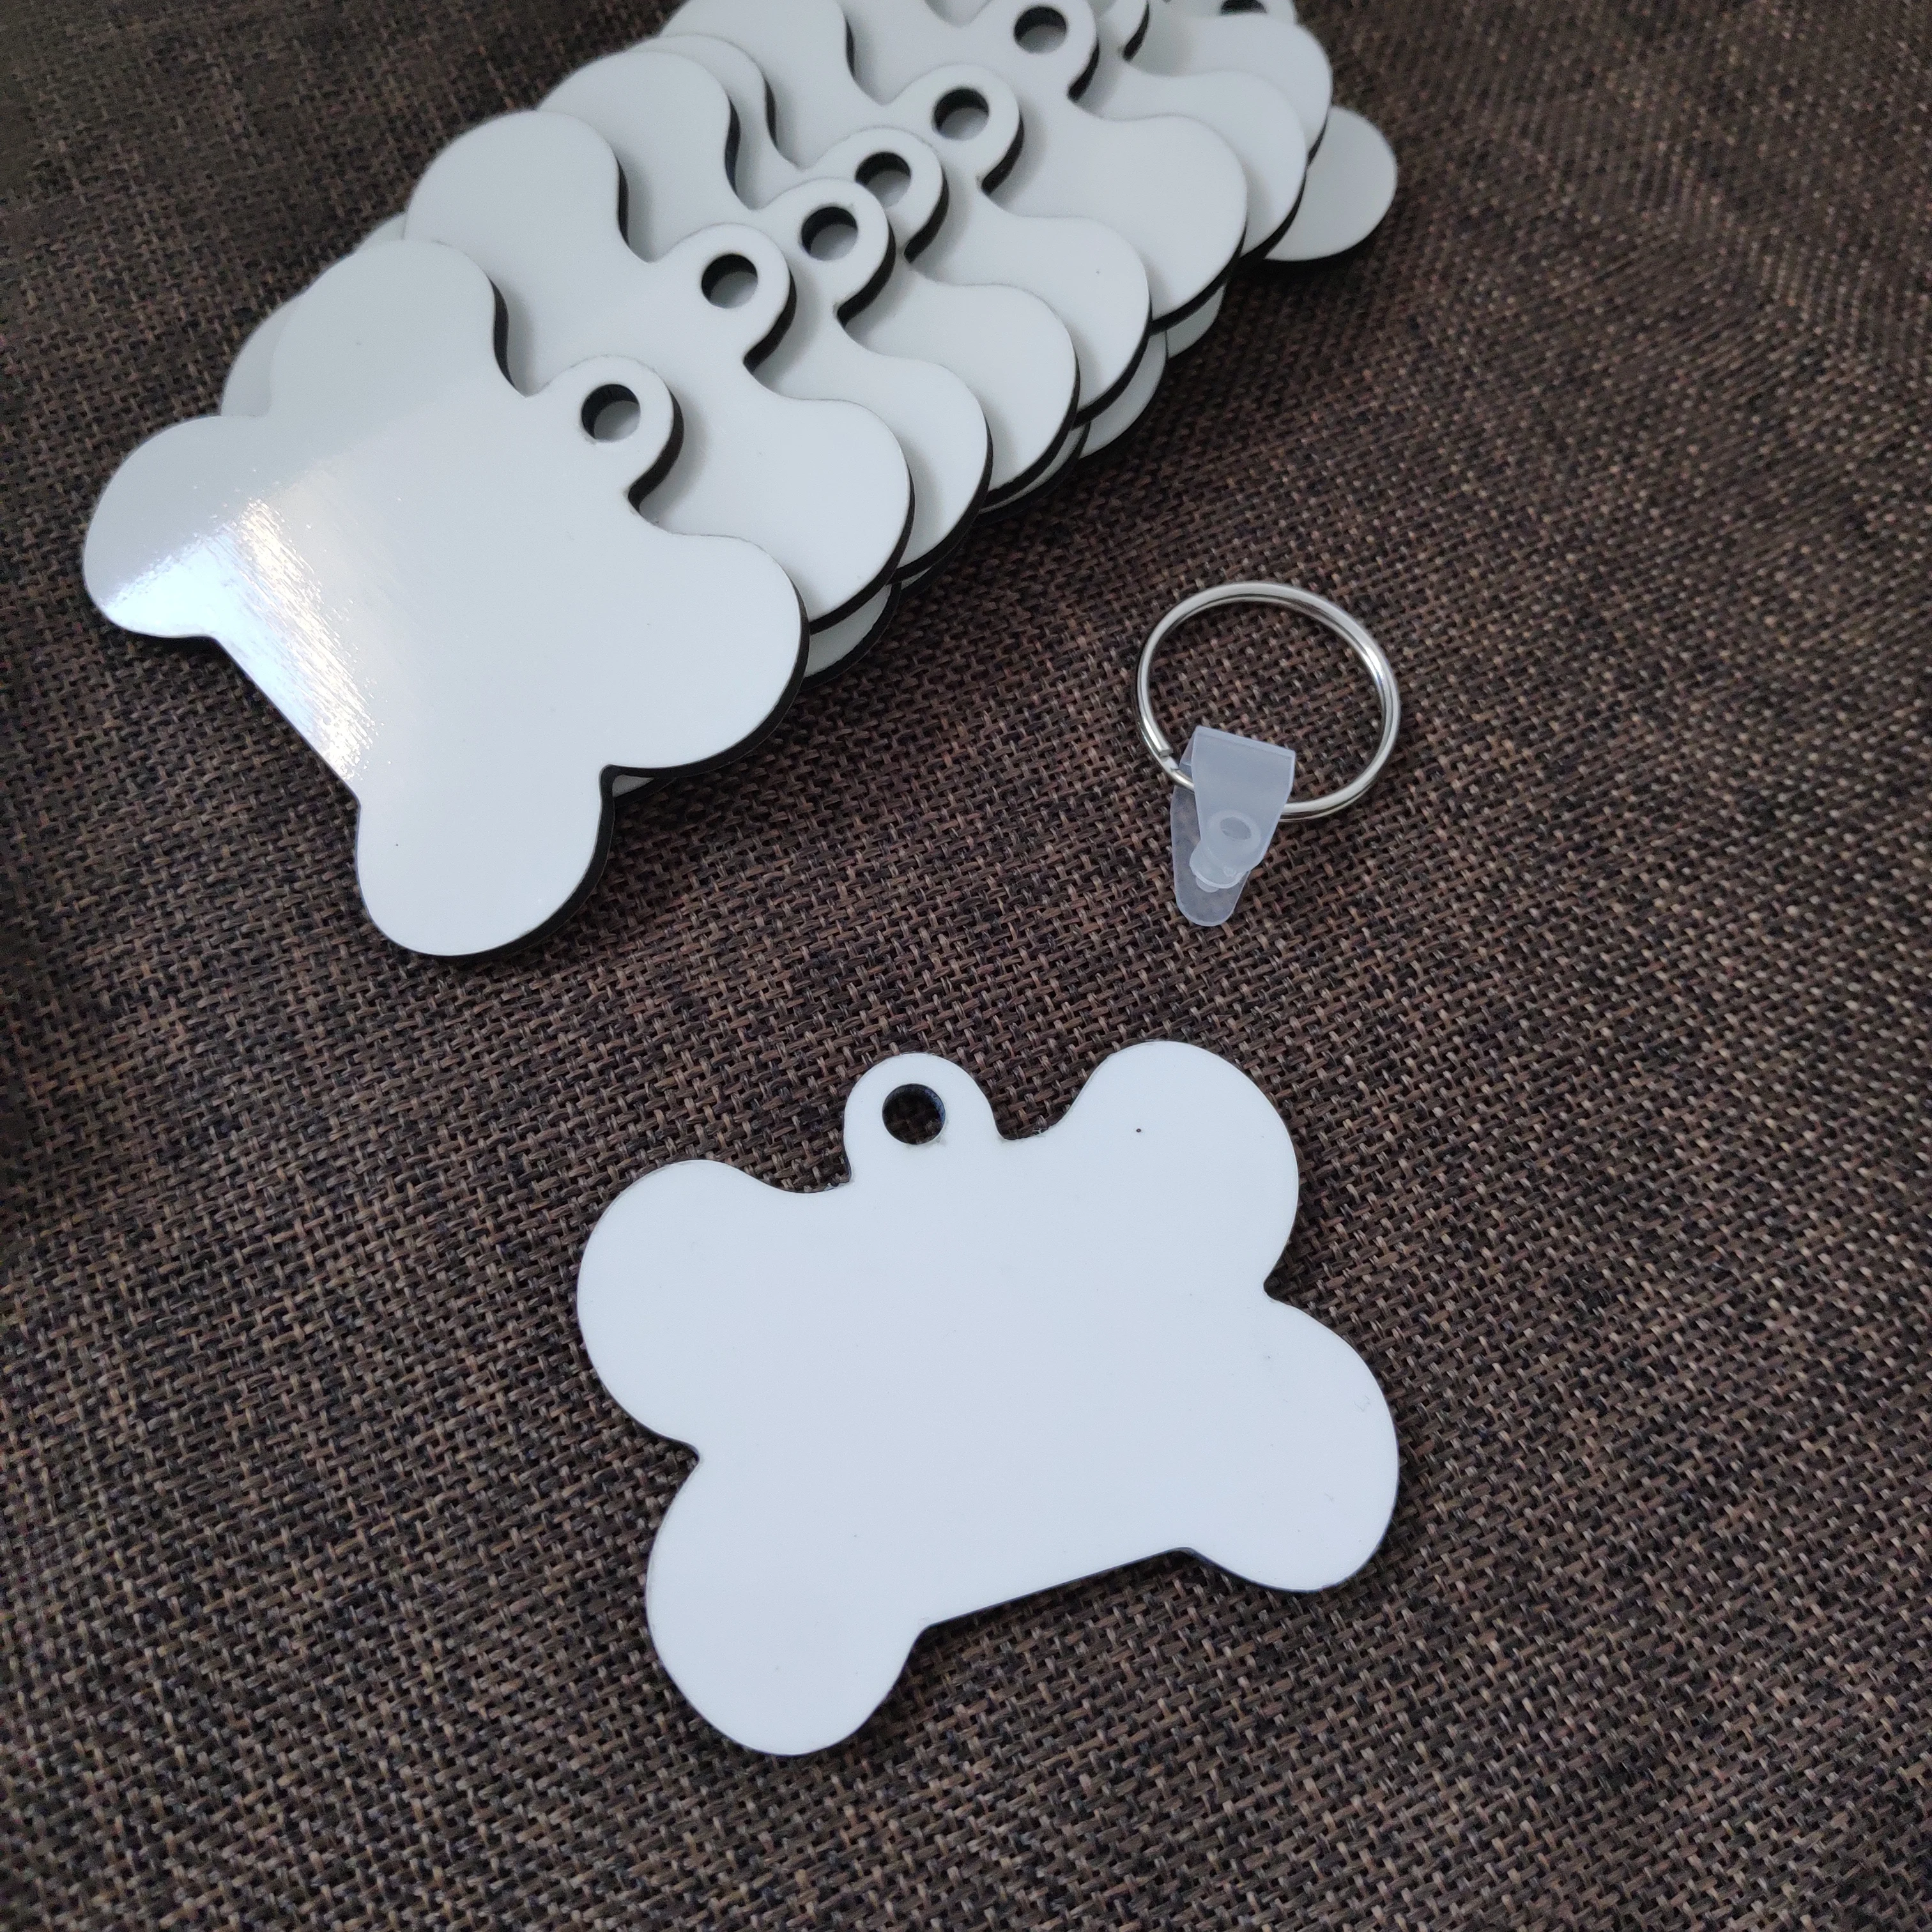 

100pcs/lots Blank Sublimation MDF Bone Shape KeyRing Tags Keychain For Choice DIY Gift Sublimation Transfer Two sides can Print